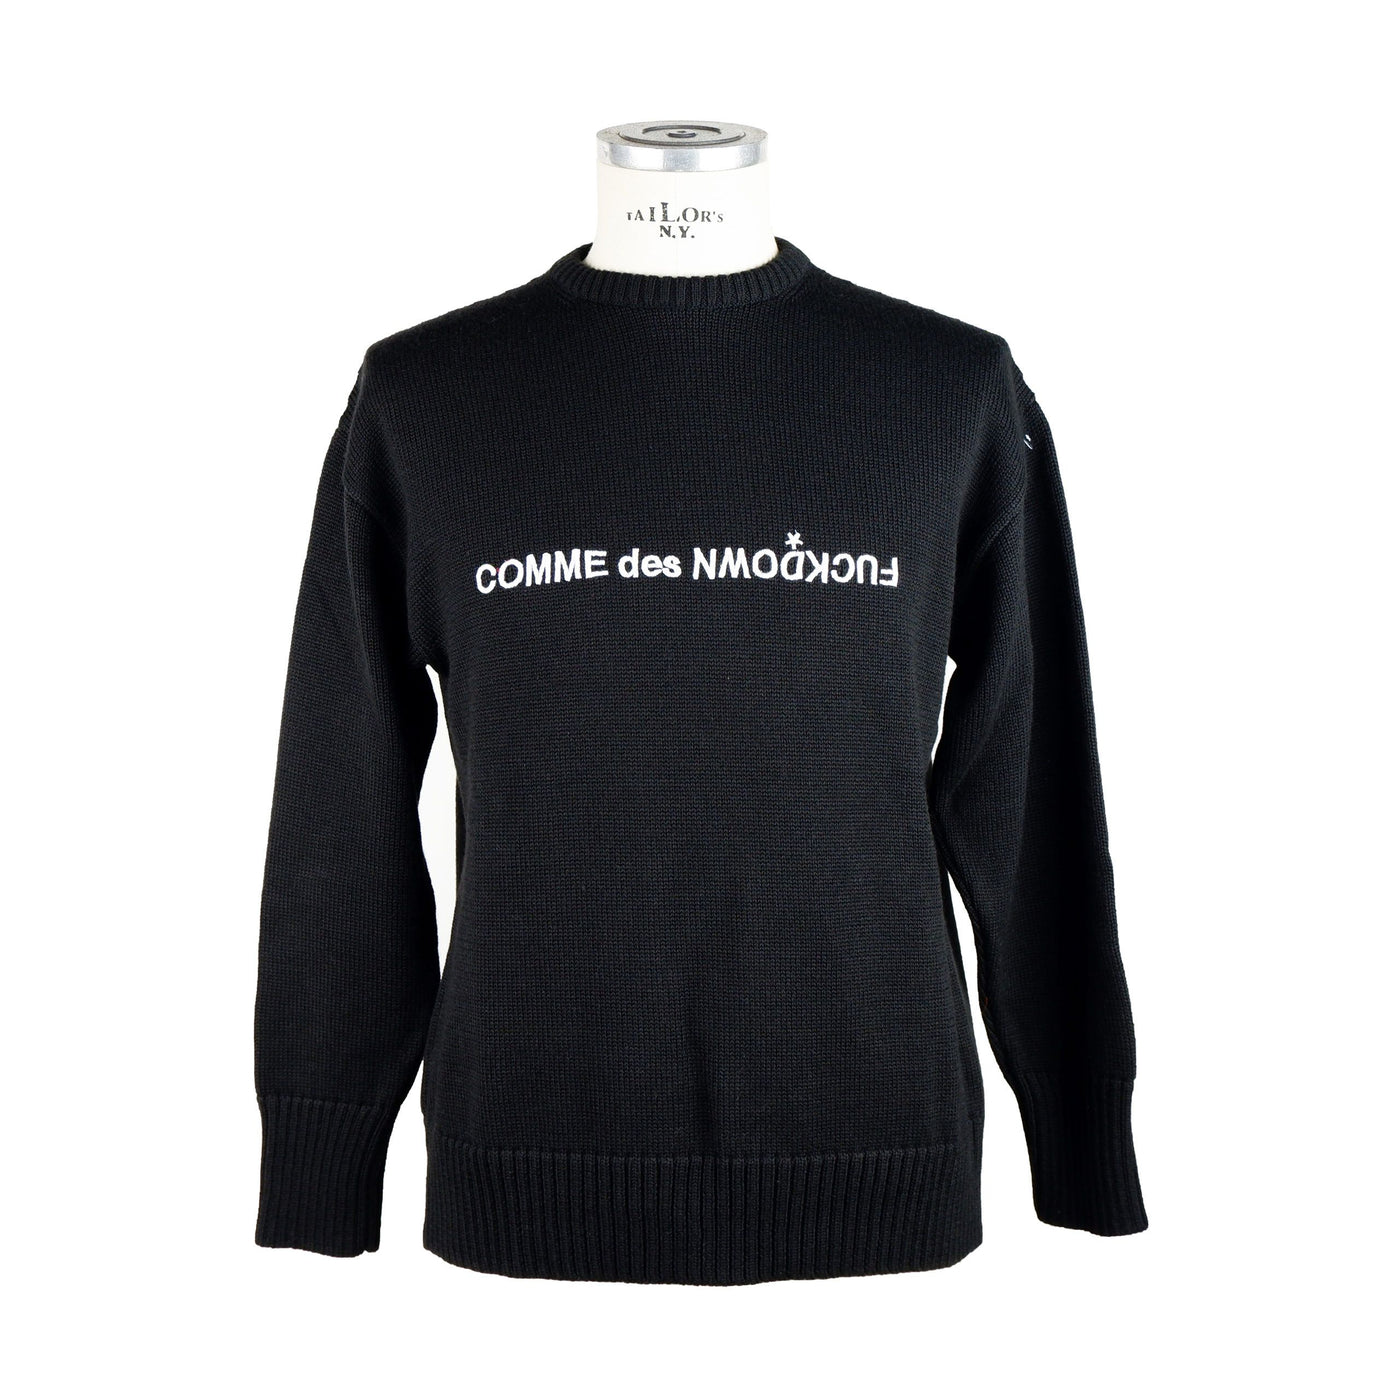 Comme Des Fuckdown Black Wool Sweater